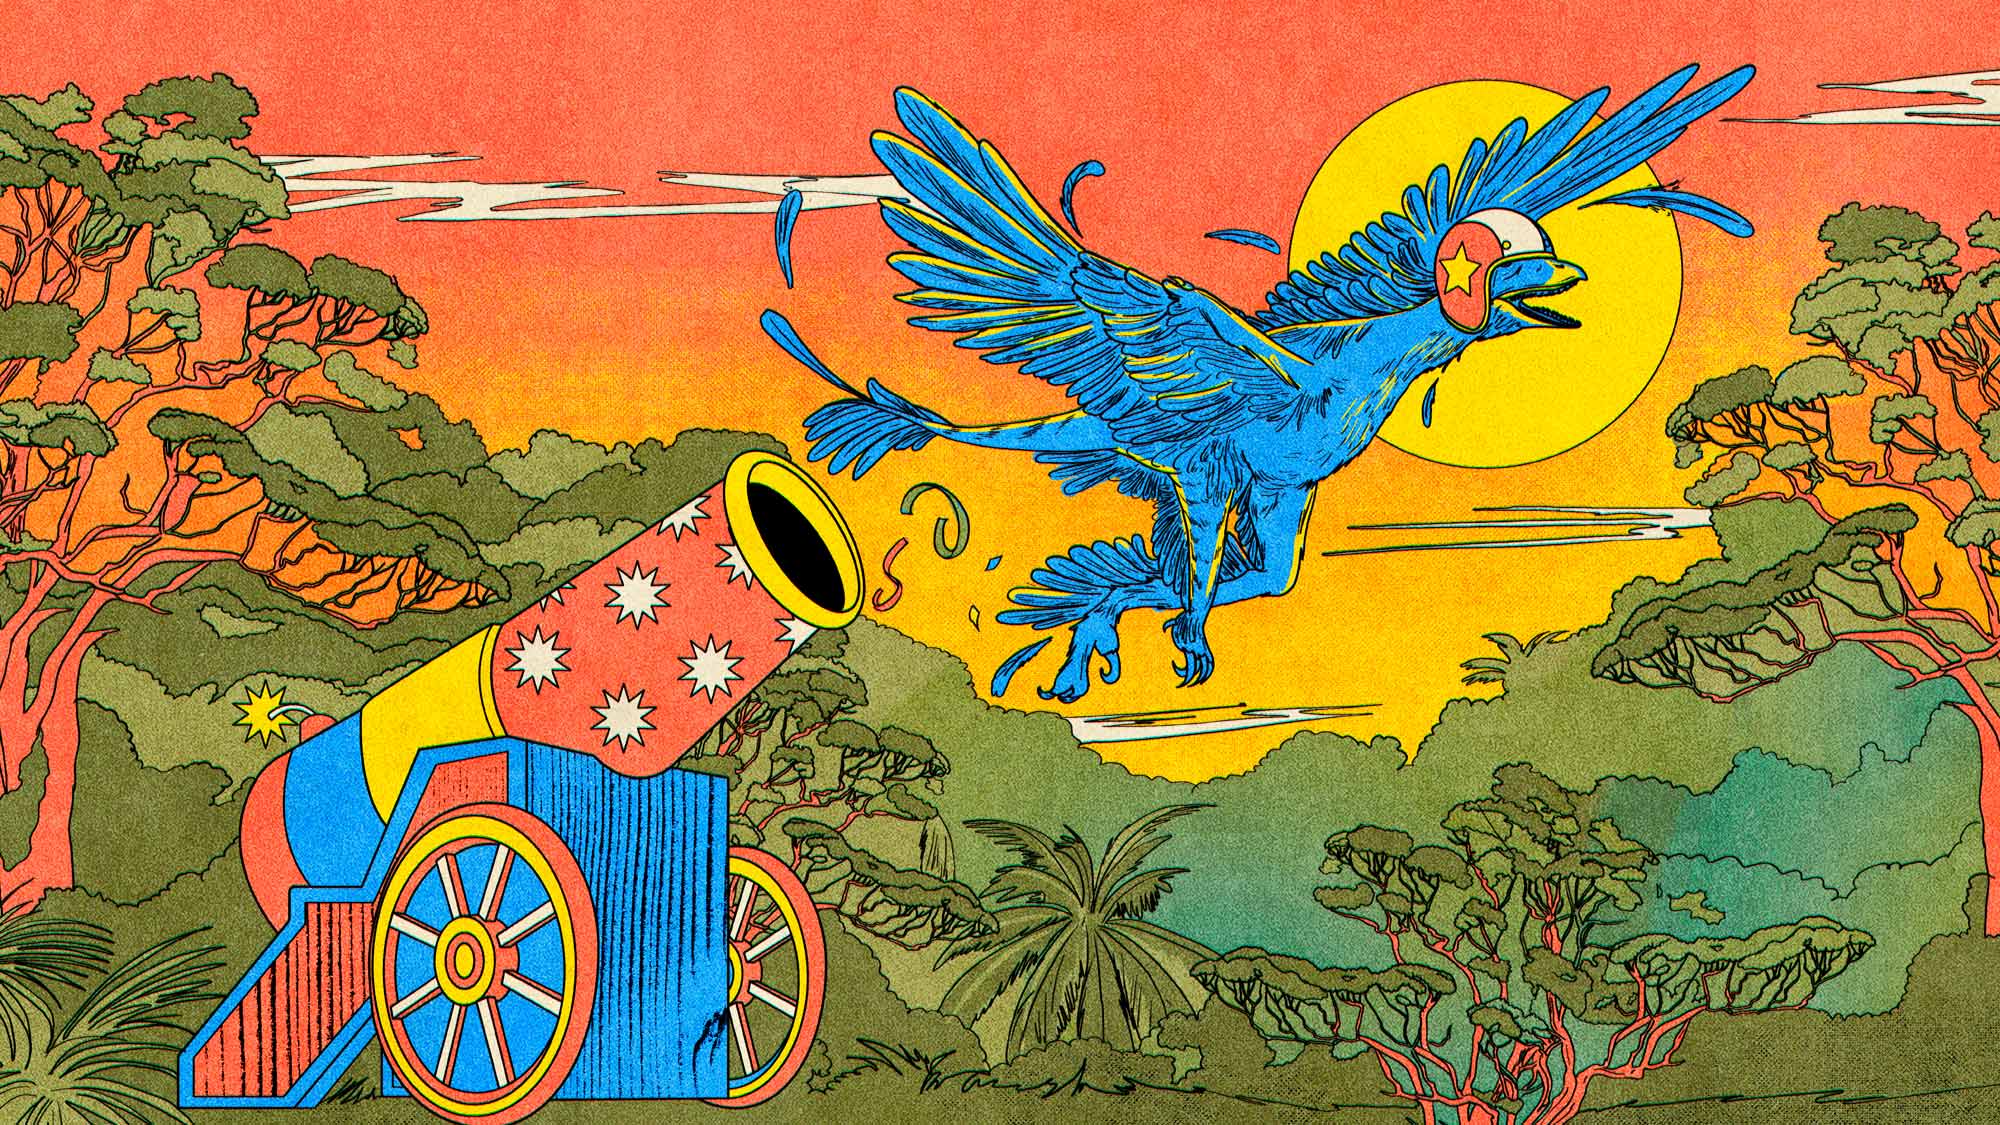 Microraptor wearing helmet is shot out of a circus cannon to represent how dinosaurs evolved to fly. Illustration in red, yellow, blue, and green.